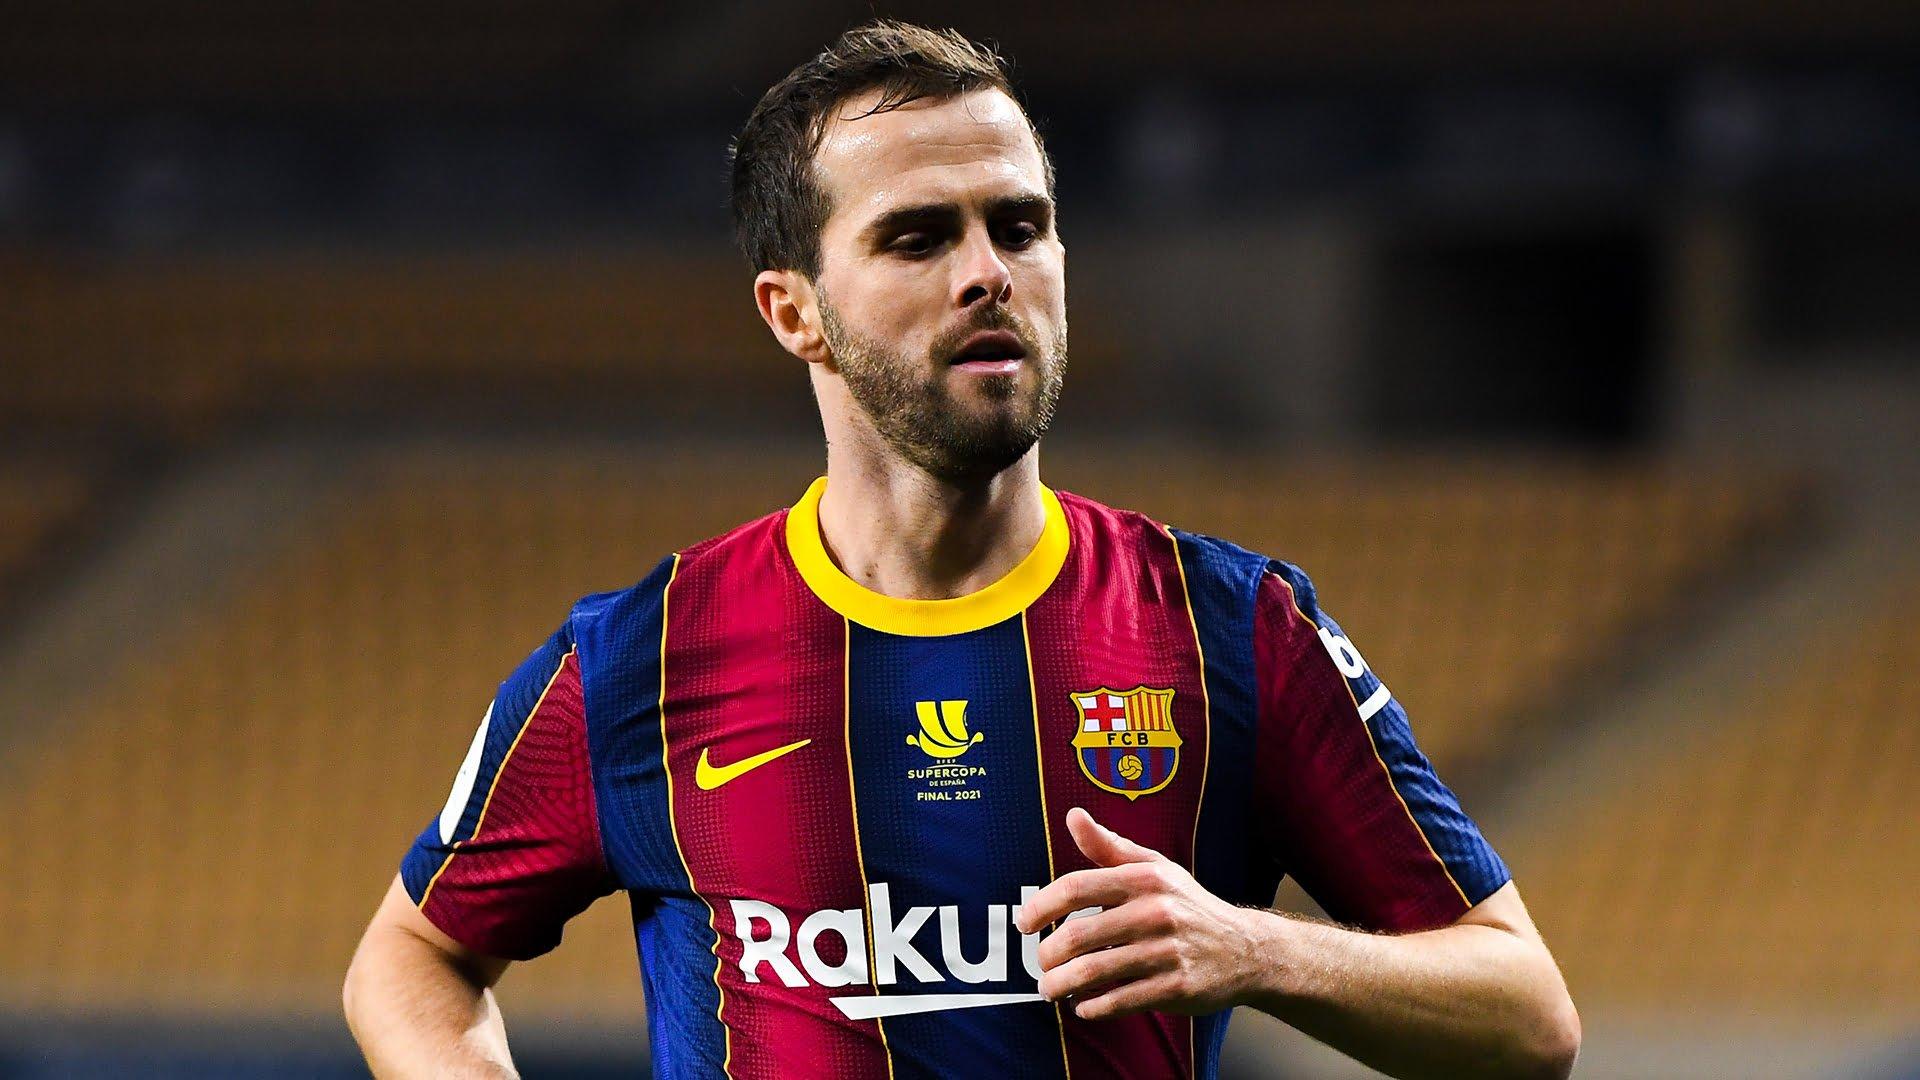 LaLiga: Pjanic reveals what Barcelona need to get back on its feet